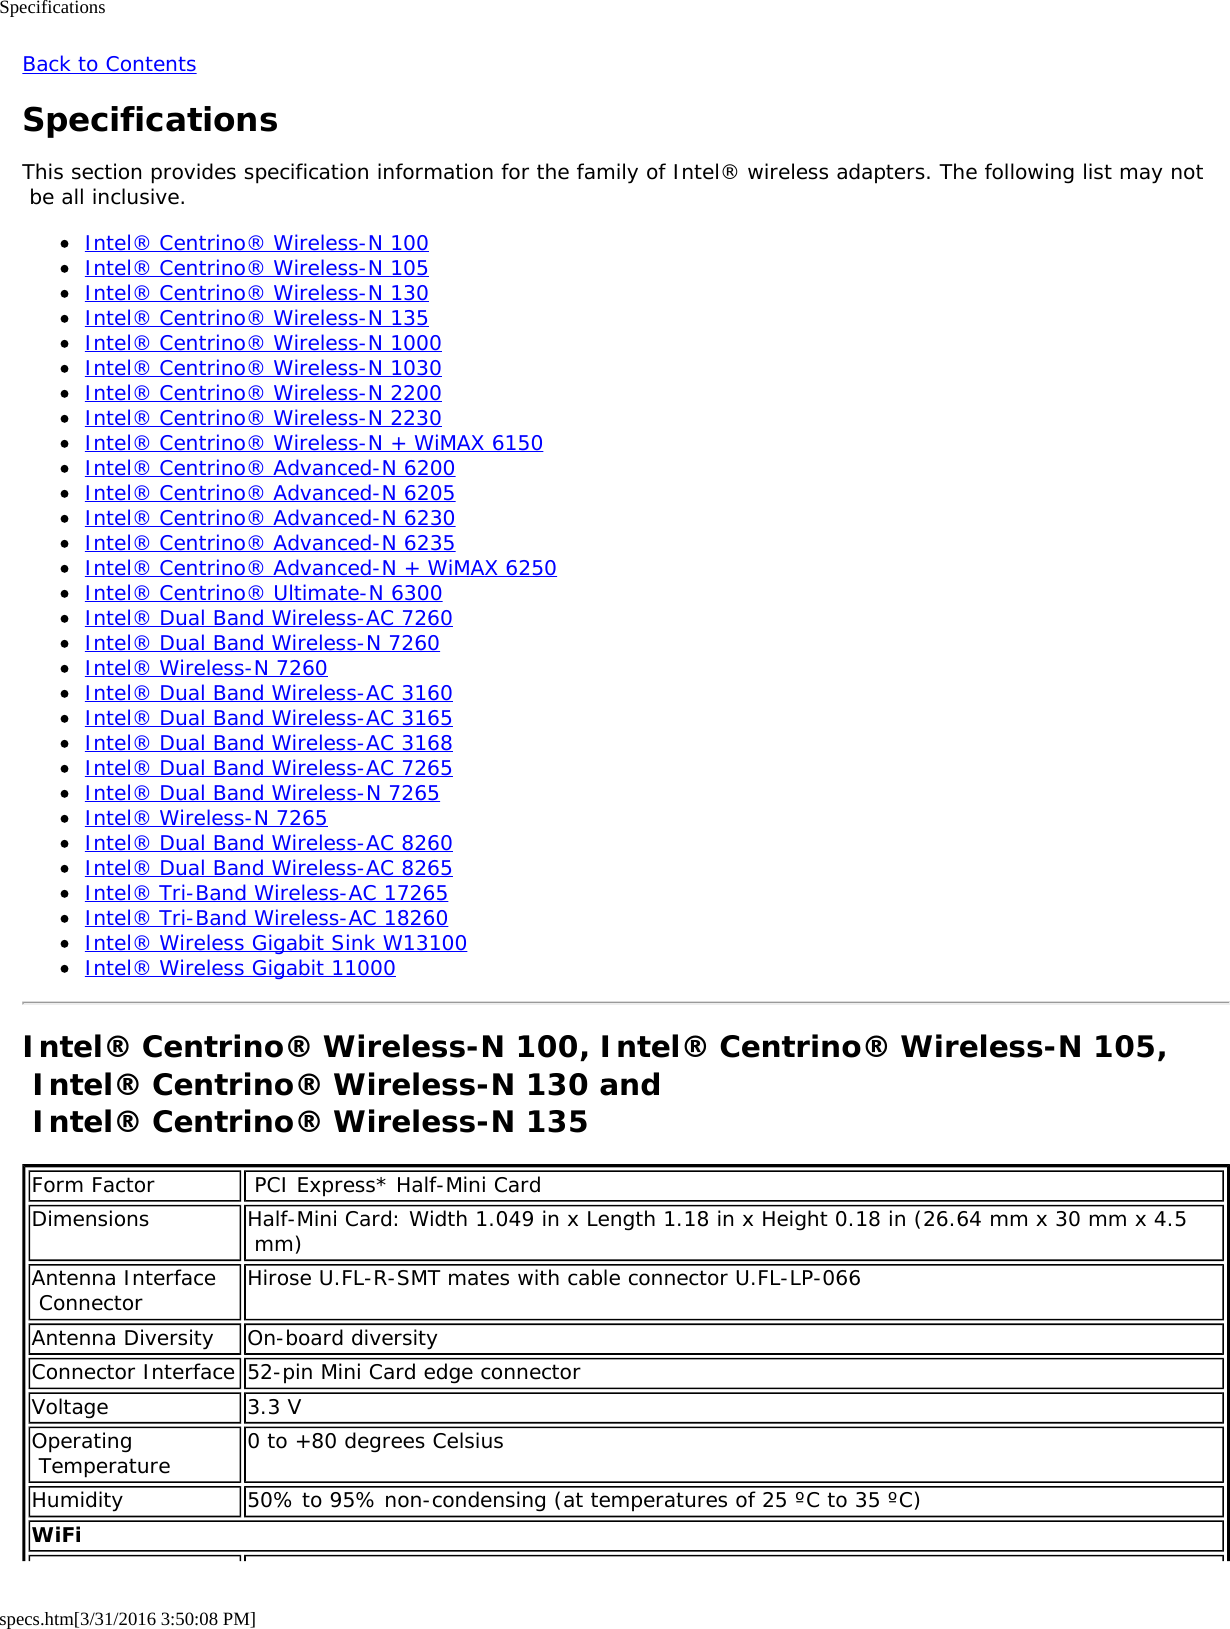 Specificationsspecs.htm[3/31/2016 3:50:08 PM]Back to ContentsSpecificationsThis section provides specification information for the family of Intel® wireless adapters. The following list may not be all inclusive.Intel® Centrino® Wireless-N 100Intel® Centrino® Wireless-N 105Intel® Centrino® Wireless-N 130Intel® Centrino® Wireless-N 135Intel® Centrino® Wireless-N 1000Intel® Centrino® Wireless-N 1030Intel® Centrino® Wireless-N 2200Intel® Centrino® Wireless-N 2230Intel® Centrino® Wireless-N + WiMAX 6150Intel® Centrino® Advanced-N 6200Intel® Centrino® Advanced-N 6205Intel® Centrino® Advanced-N 6230Intel® Centrino® Advanced-N 6235Intel® Centrino® Advanced-N + WiMAX 6250Intel® Centrino® Ultimate-N 6300Intel® Dual Band Wireless-AC 7260Intel® Dual Band Wireless-N 7260Intel® Wireless-N 7260Intel® Dual Band Wireless-AC 3160Intel® Dual Band Wireless-AC 3165Intel® Dual Band Wireless-AC 3168Intel® Dual Band Wireless-AC 7265Intel® Dual Band Wireless-N 7265Intel® Wireless-N 7265Intel® Dual Band Wireless-AC 8260Intel® Dual Band Wireless-AC 8265Intel® Tri-Band Wireless-AC 17265Intel® Tri-Band Wireless-AC 18260Intel® Wireless Gigabit Sink W13100Intel® Wireless Gigabit 11000Intel® Centrino® Wireless-N 100, Intel® Centrino® Wireless-N 105, Intel® Centrino® Wireless-N 130 and  Intel® Centrino® Wireless-N 135Form Factor  PCI Express* Half-Mini CardDimensions Half-Mini Card: Width 1.049 in x Length 1.18 in x Height 0.18 in (26.64 mm x 30 mm x 4.5 mm)Antenna Interface Connector Hirose U.FL-R-SMT mates with cable connector U.FL-LP-066Antenna Diversity On-board diversityConnector Interface 52-pin Mini Card edge connectorVoltage 3.3 VOperating Temperature 0 to +80 degrees CelsiusHumidity 50% to 95% non-condensing (at temperatures of 25 ºC to 35 ºC)WiFi